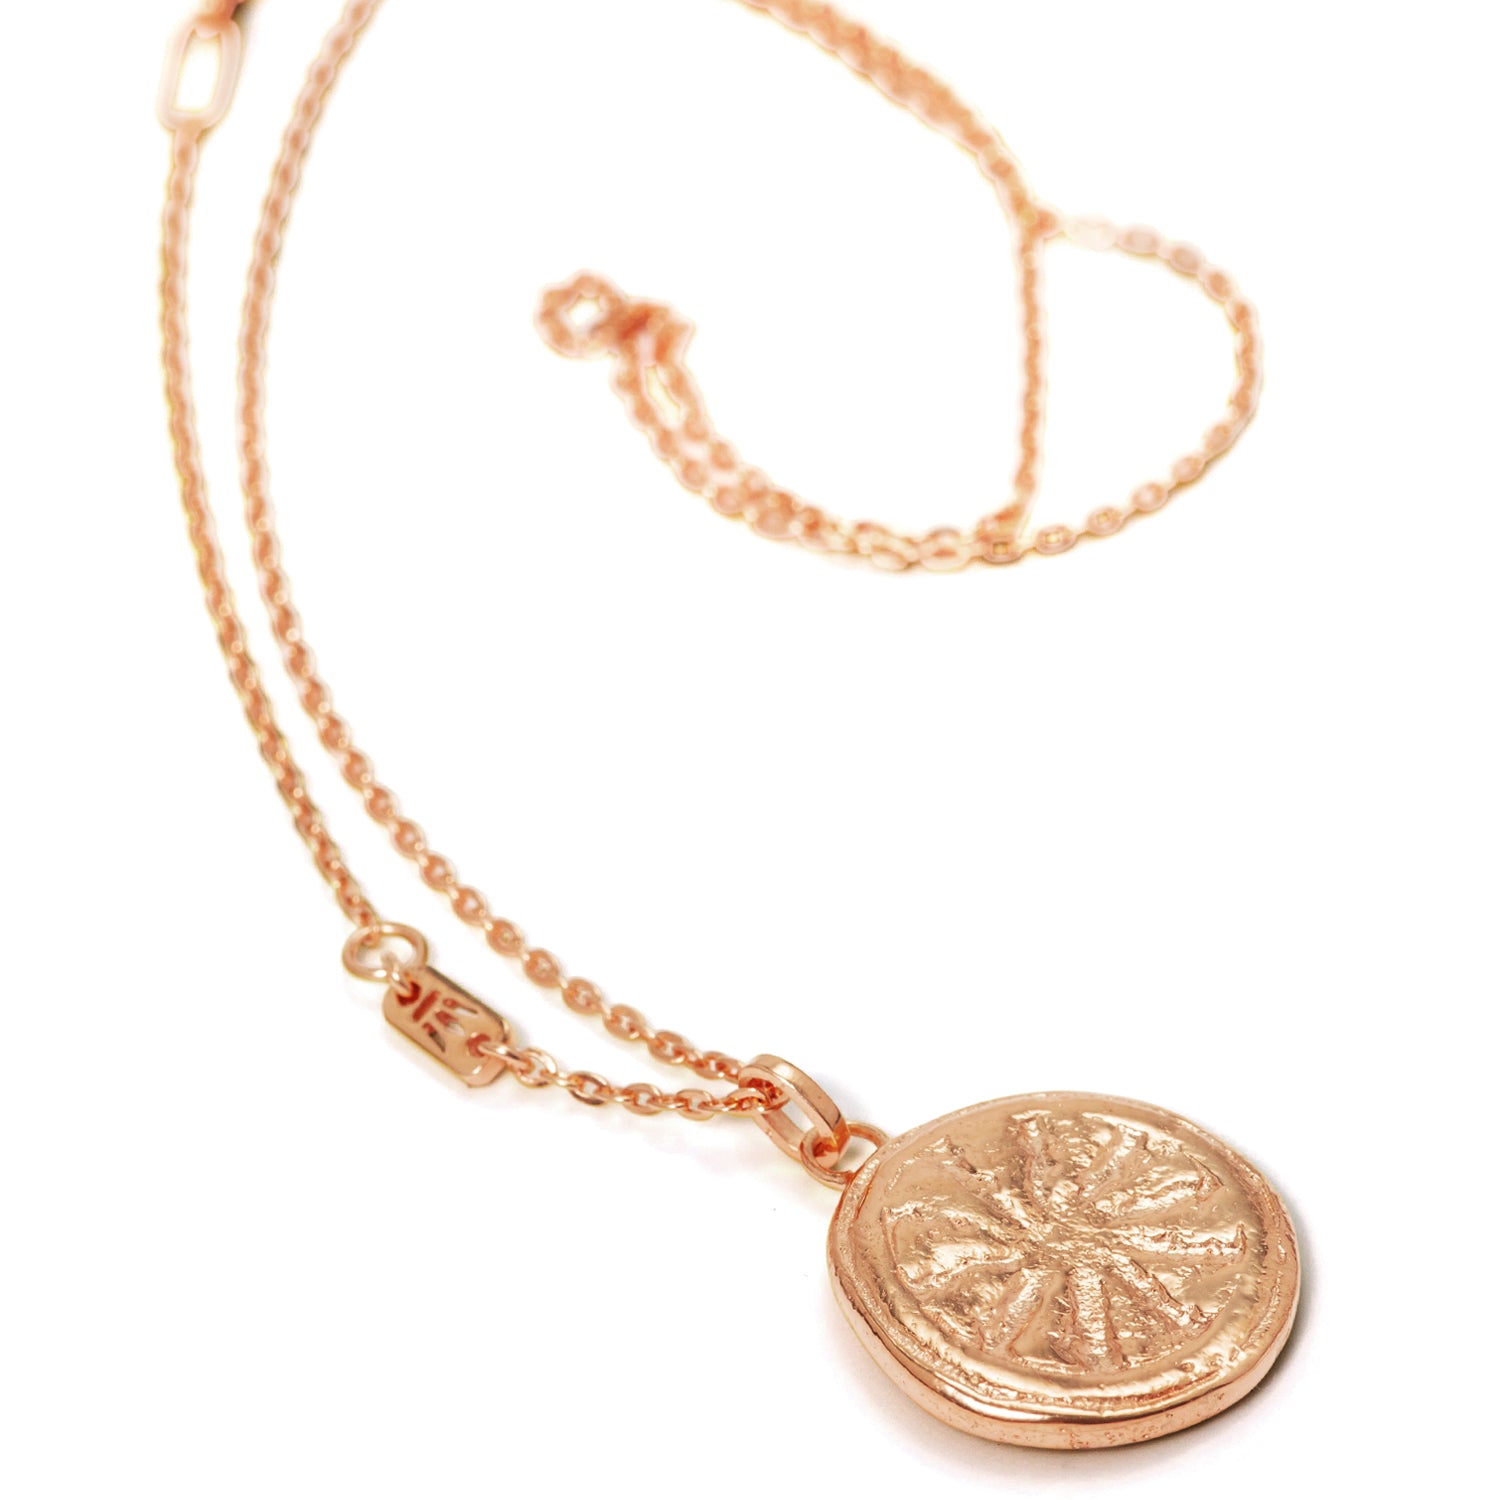  Rosegold-plated Dharma wheel pendant by ETERNAL BLISS - Spiritual jewelry